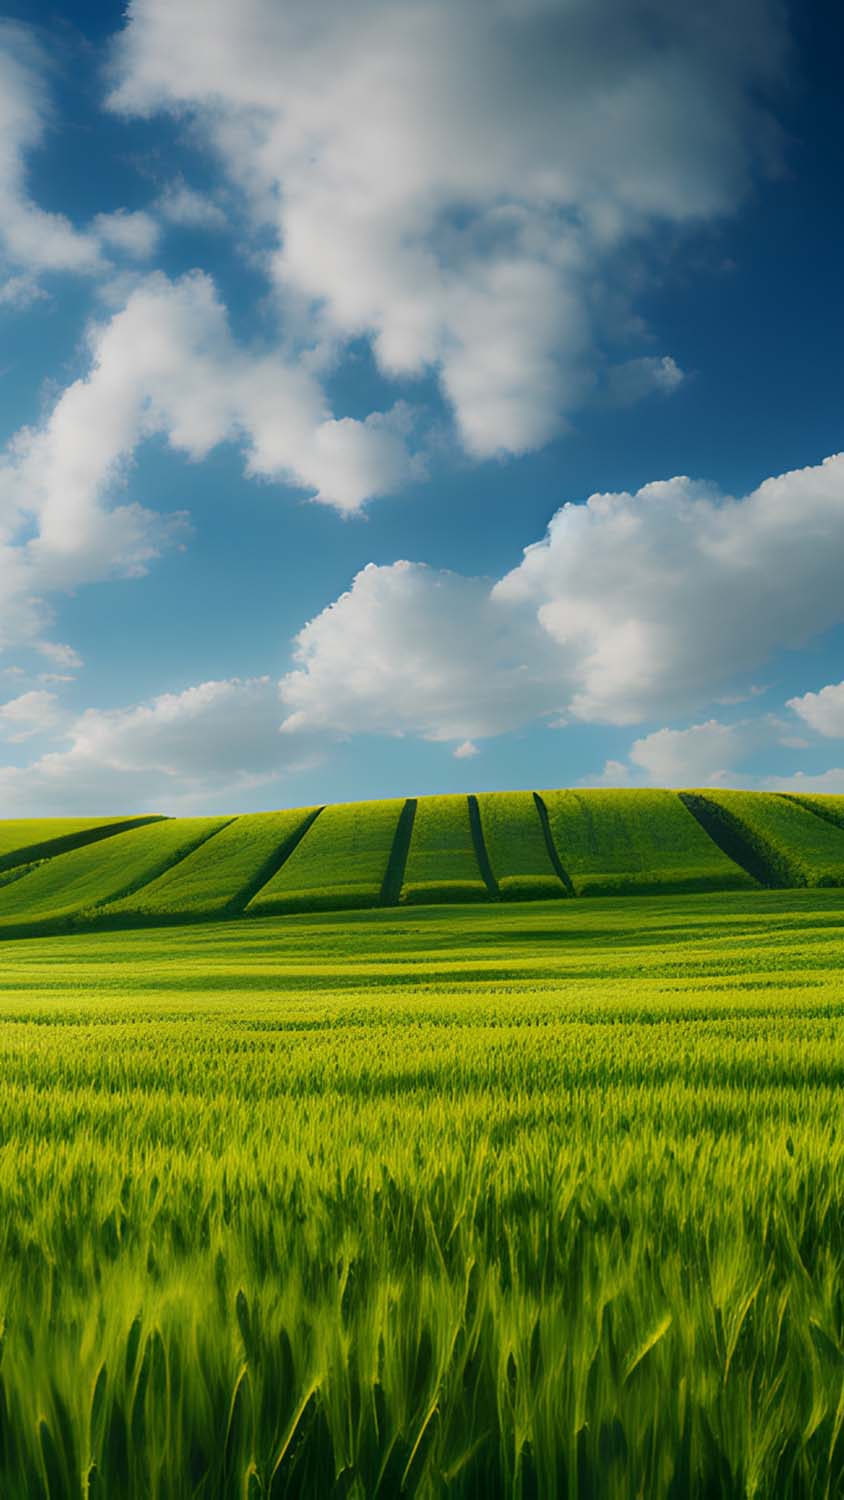 Its Bliss behind the iconic Windows XP photo  CNET